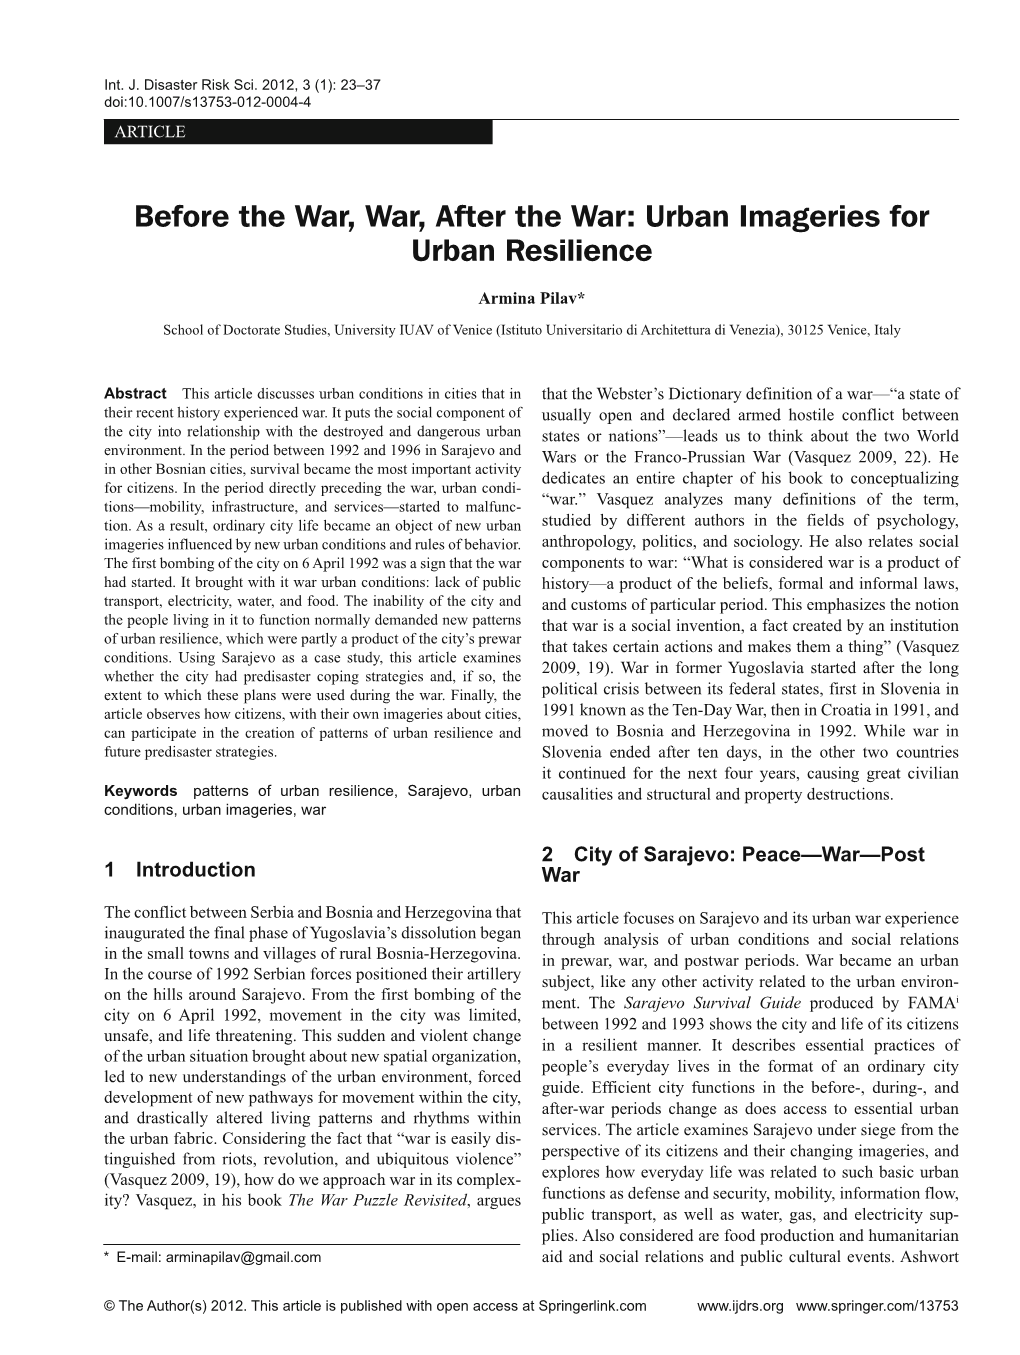 Before the War, War, After the War: Urban Imageries for Urban Resilience